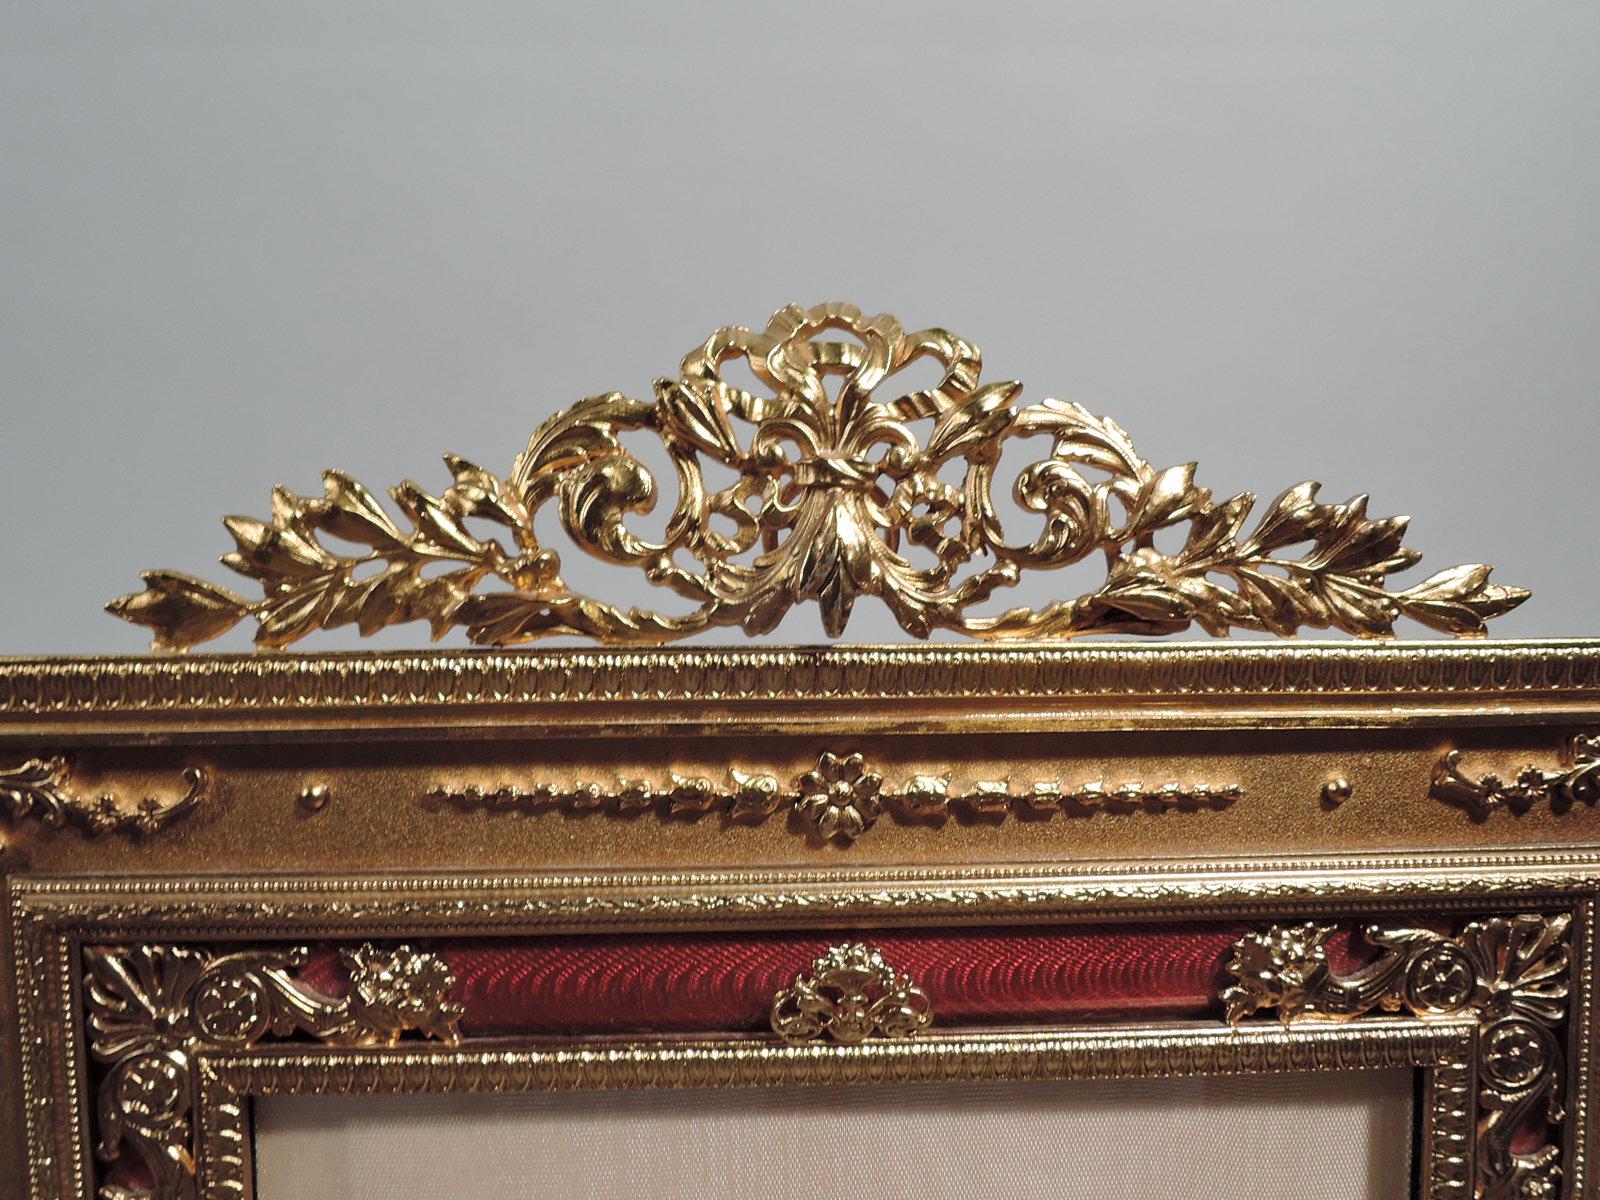 Turn-of-the-century French gilt bronze picture frame. Rectangular window in same surround with raised leaf-and-dart, imbricated leaf, and beaded borders. Red guilloche border and applied and pierced flower baskets, cornucopias, bouquets and shells.